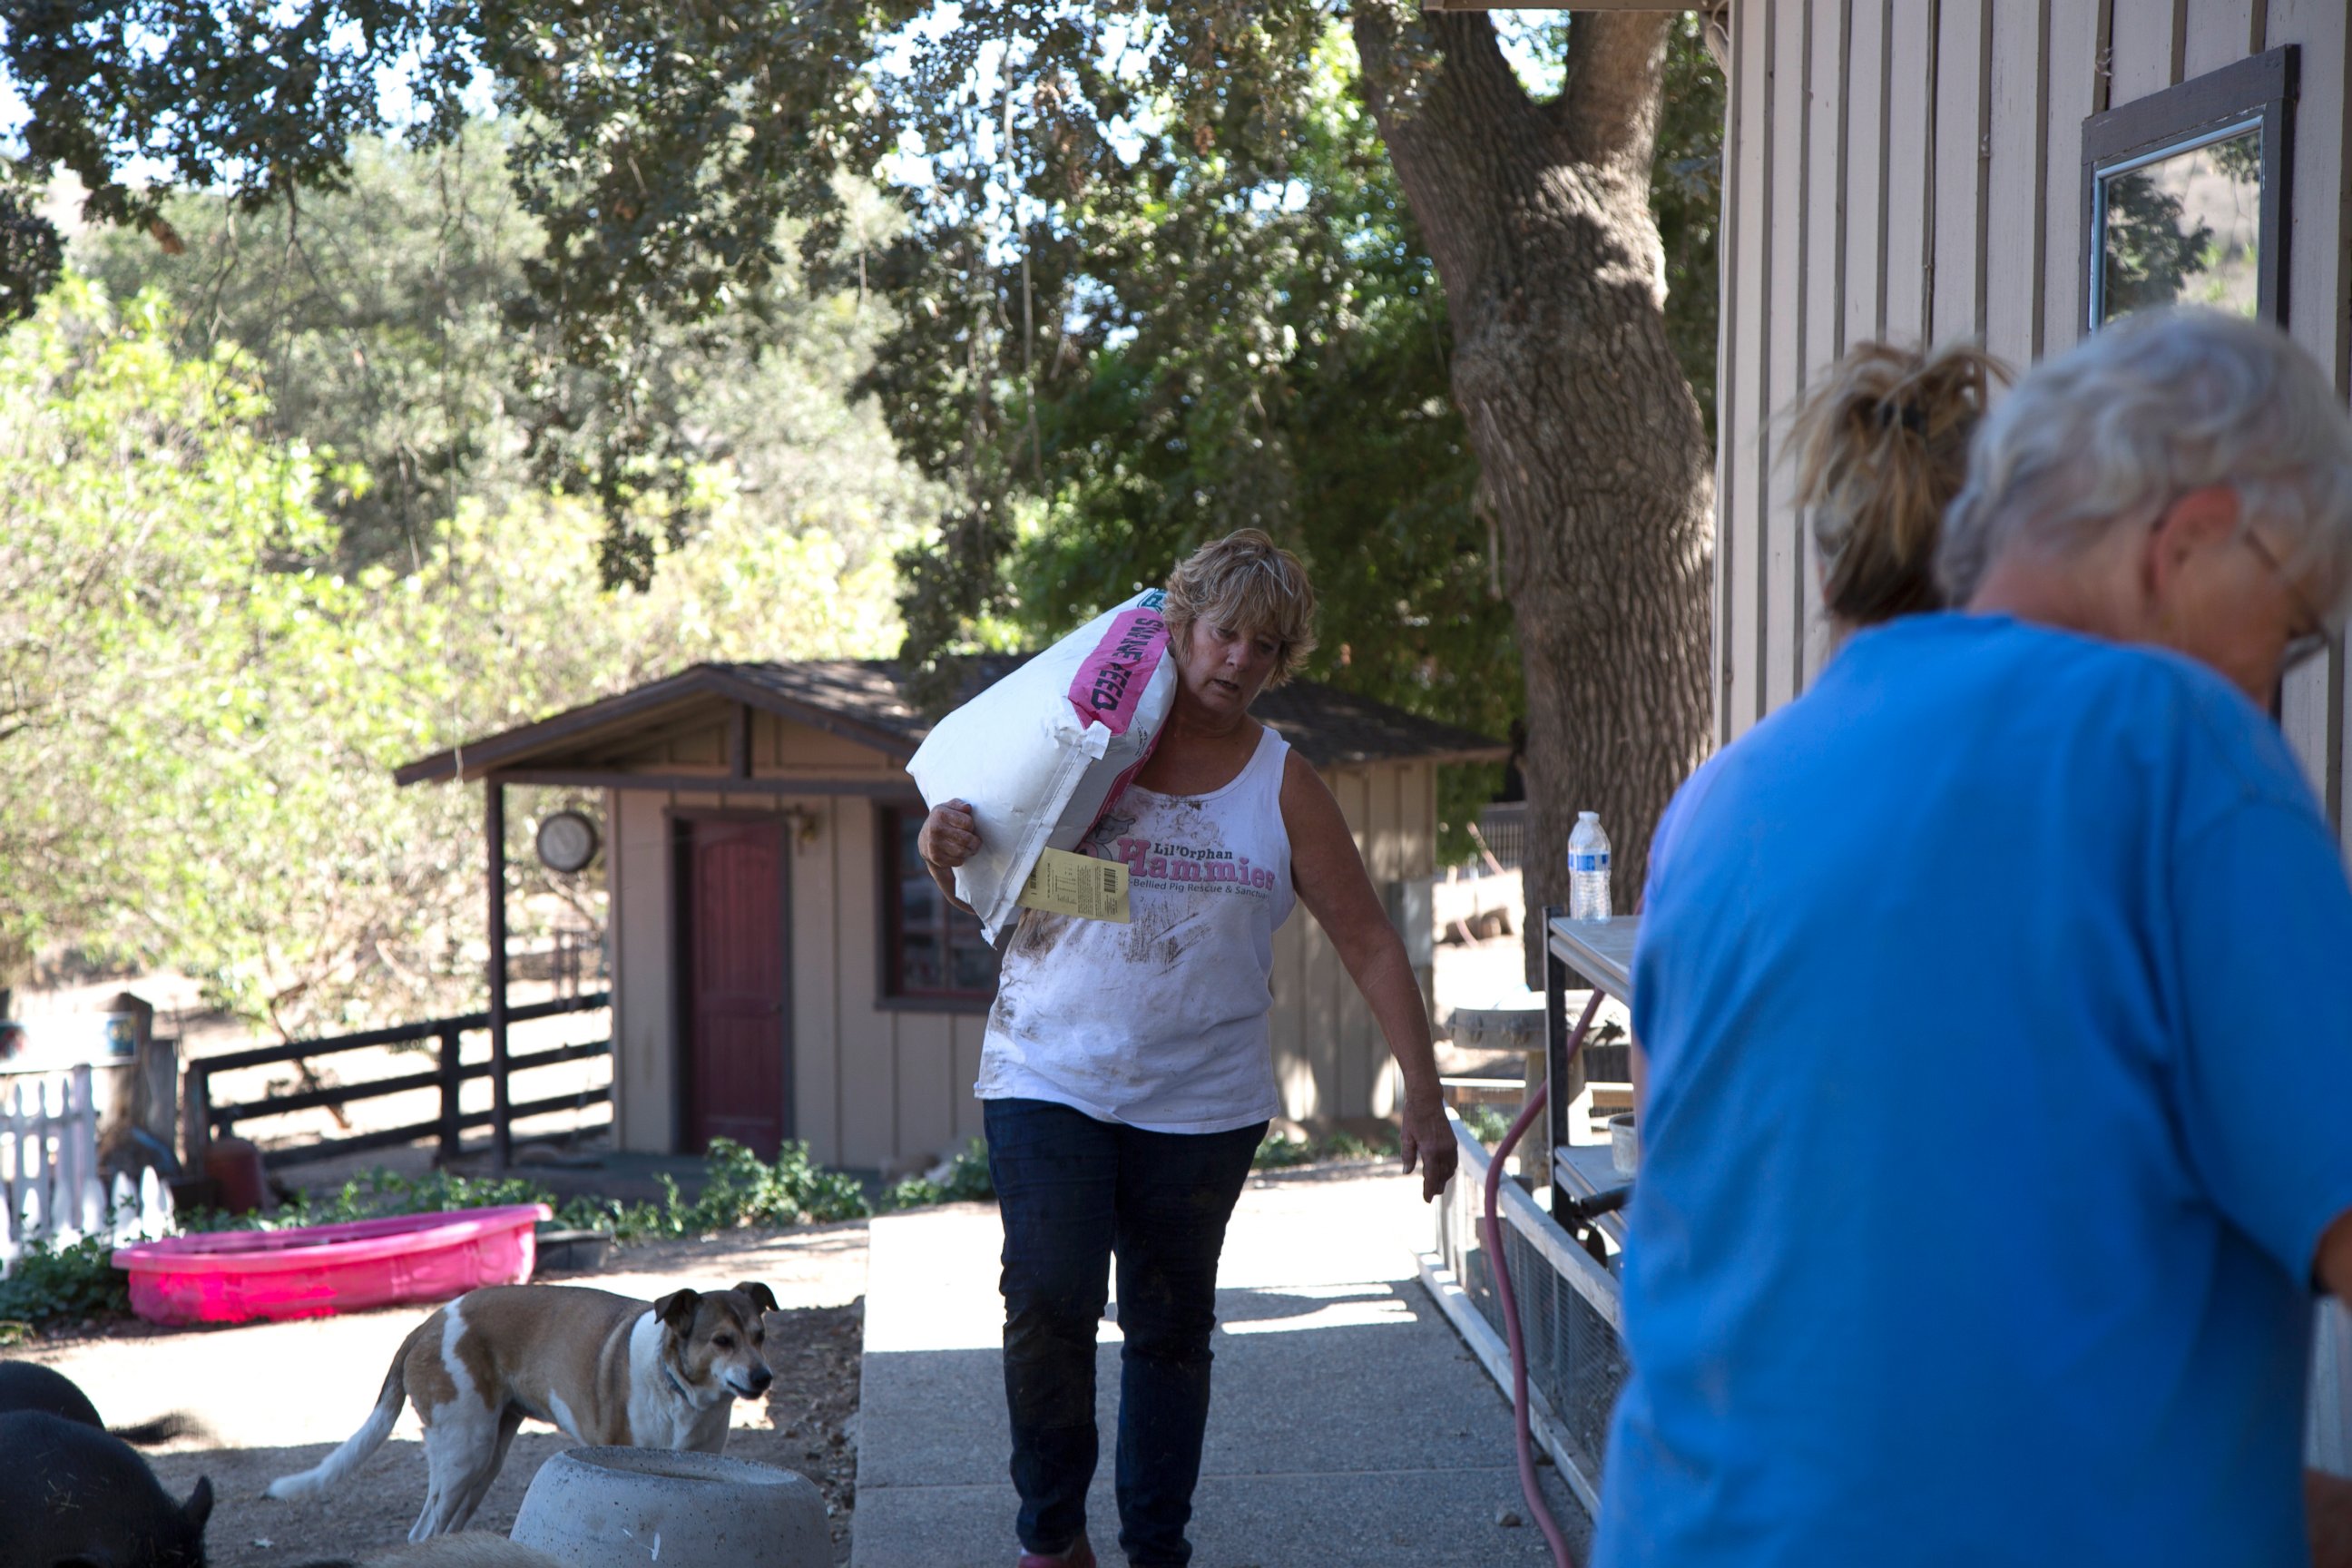 PHOTO: Susan Parkinson carries food to feed the pigs in Solvang, California.